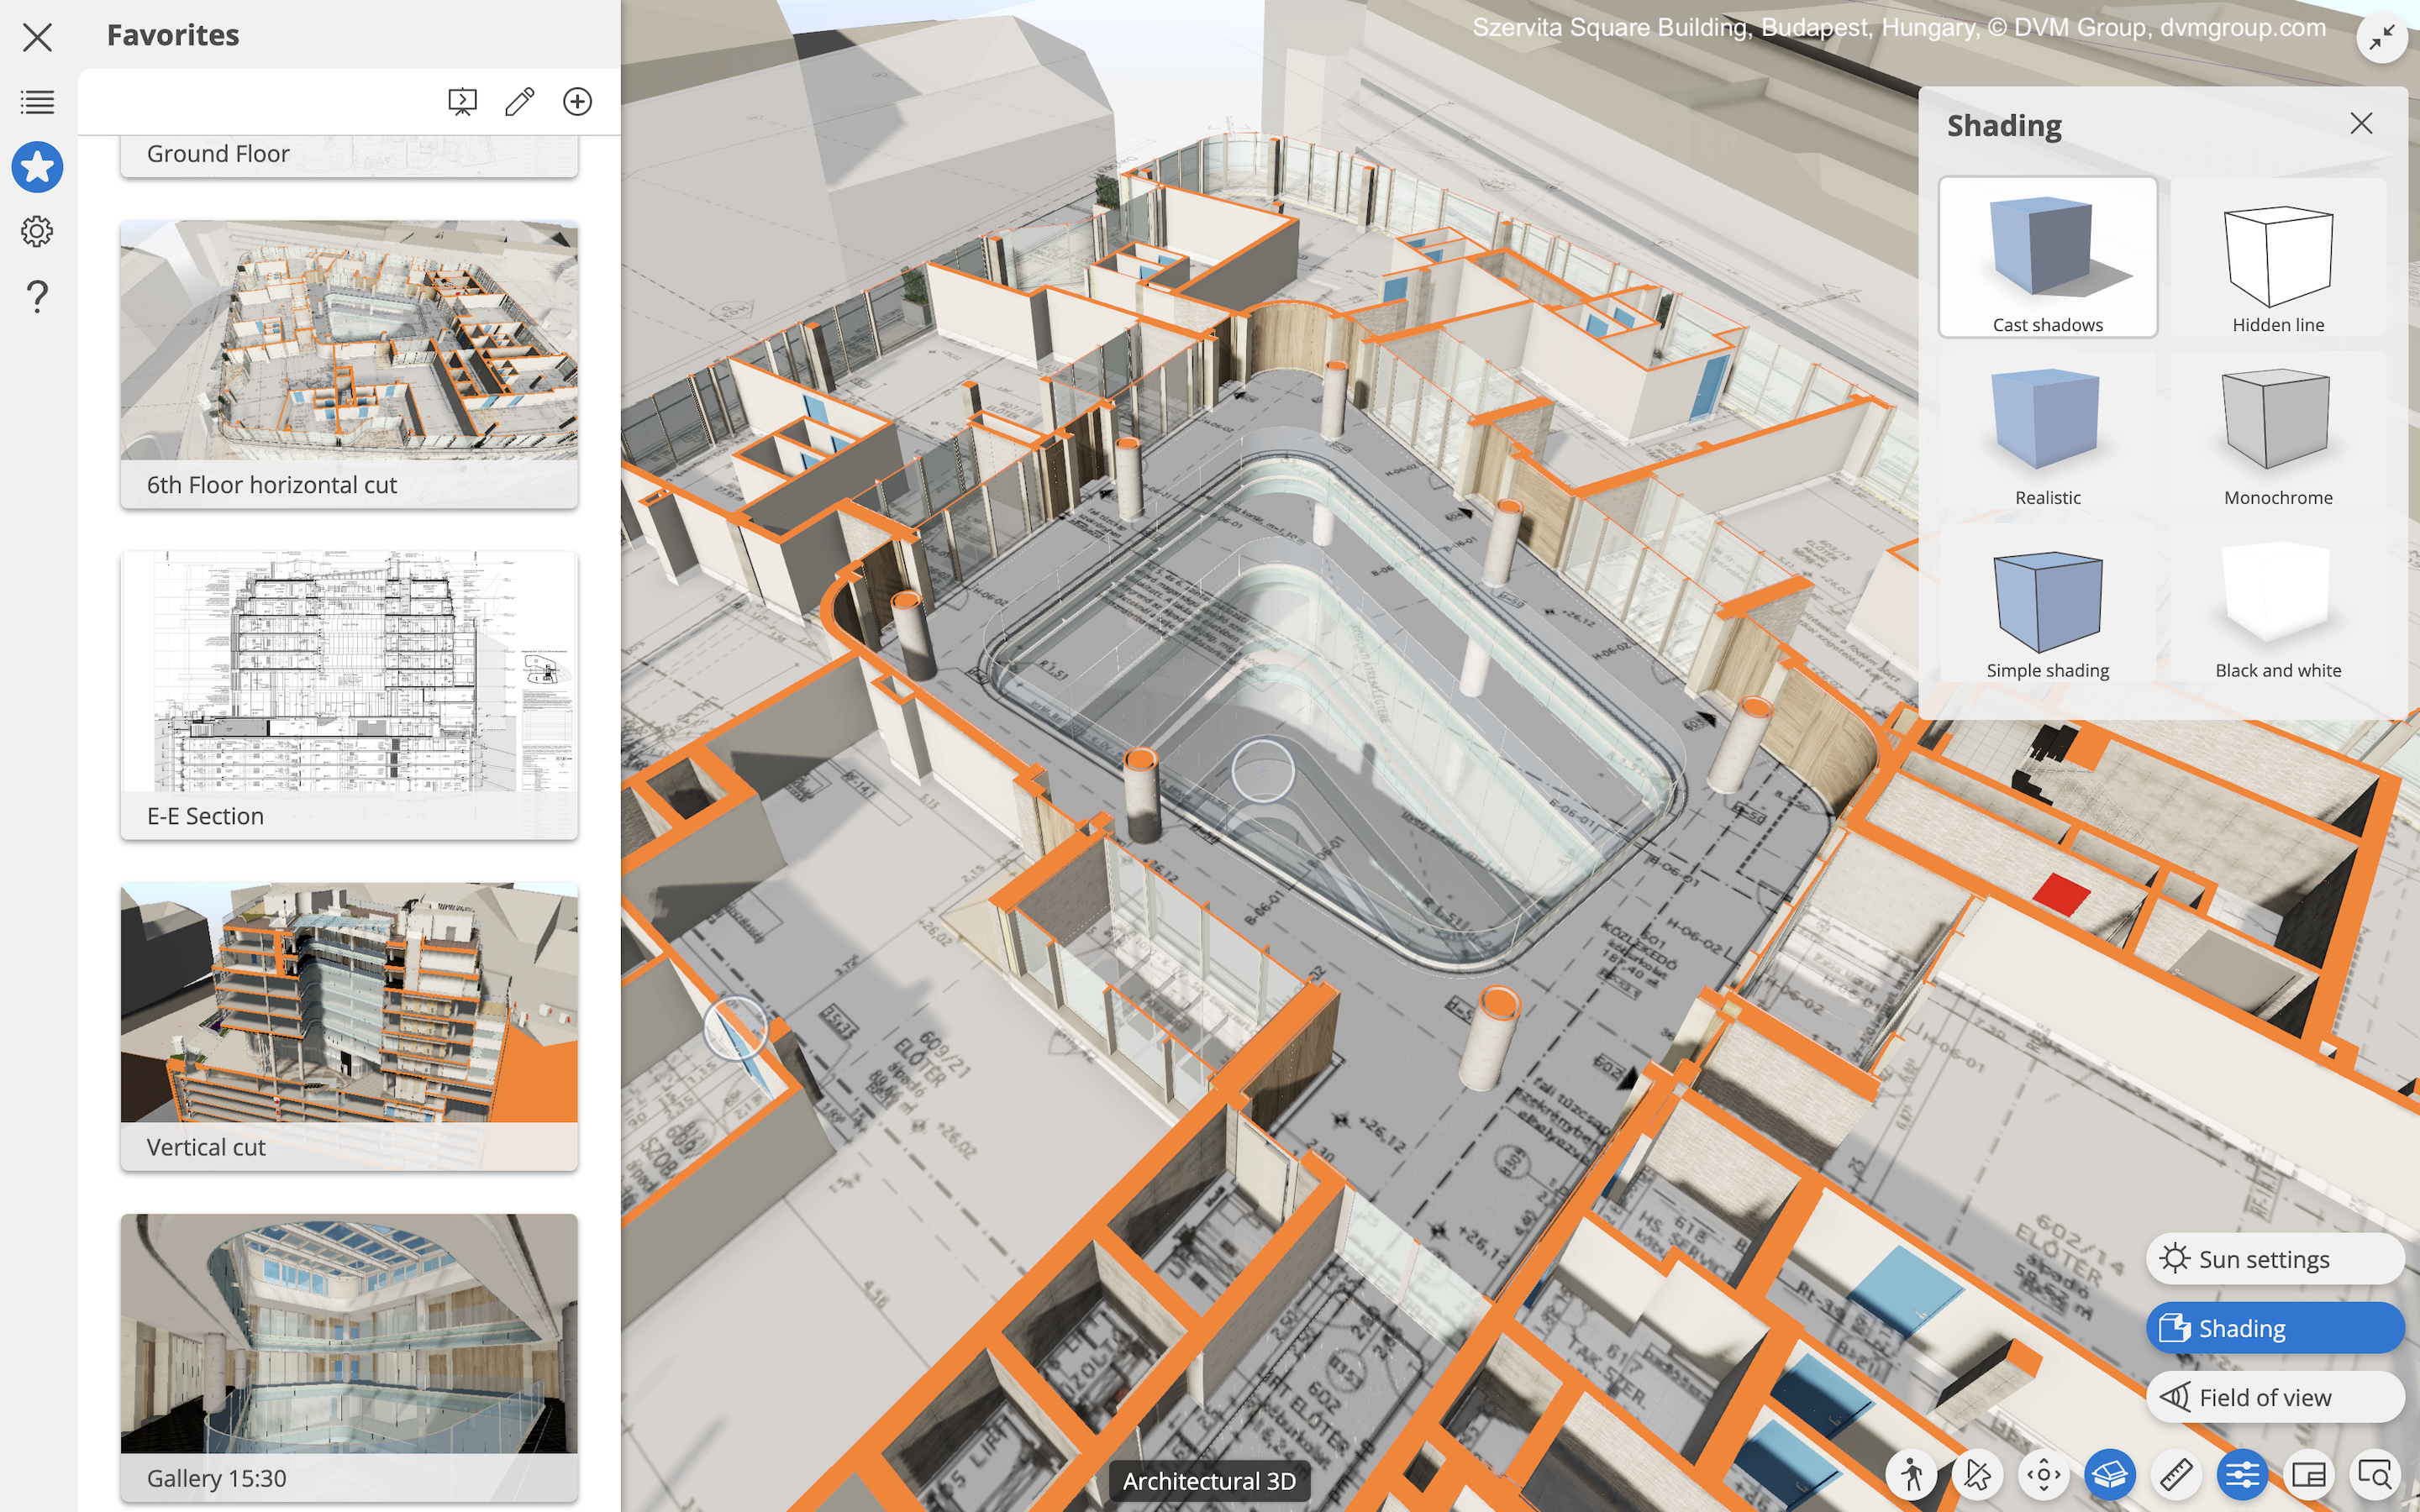 3D model and documentation in BIMx App. Image Credit: Szervita Square Building, Budapest, Hungary © DVM Group, dvmgroup.com